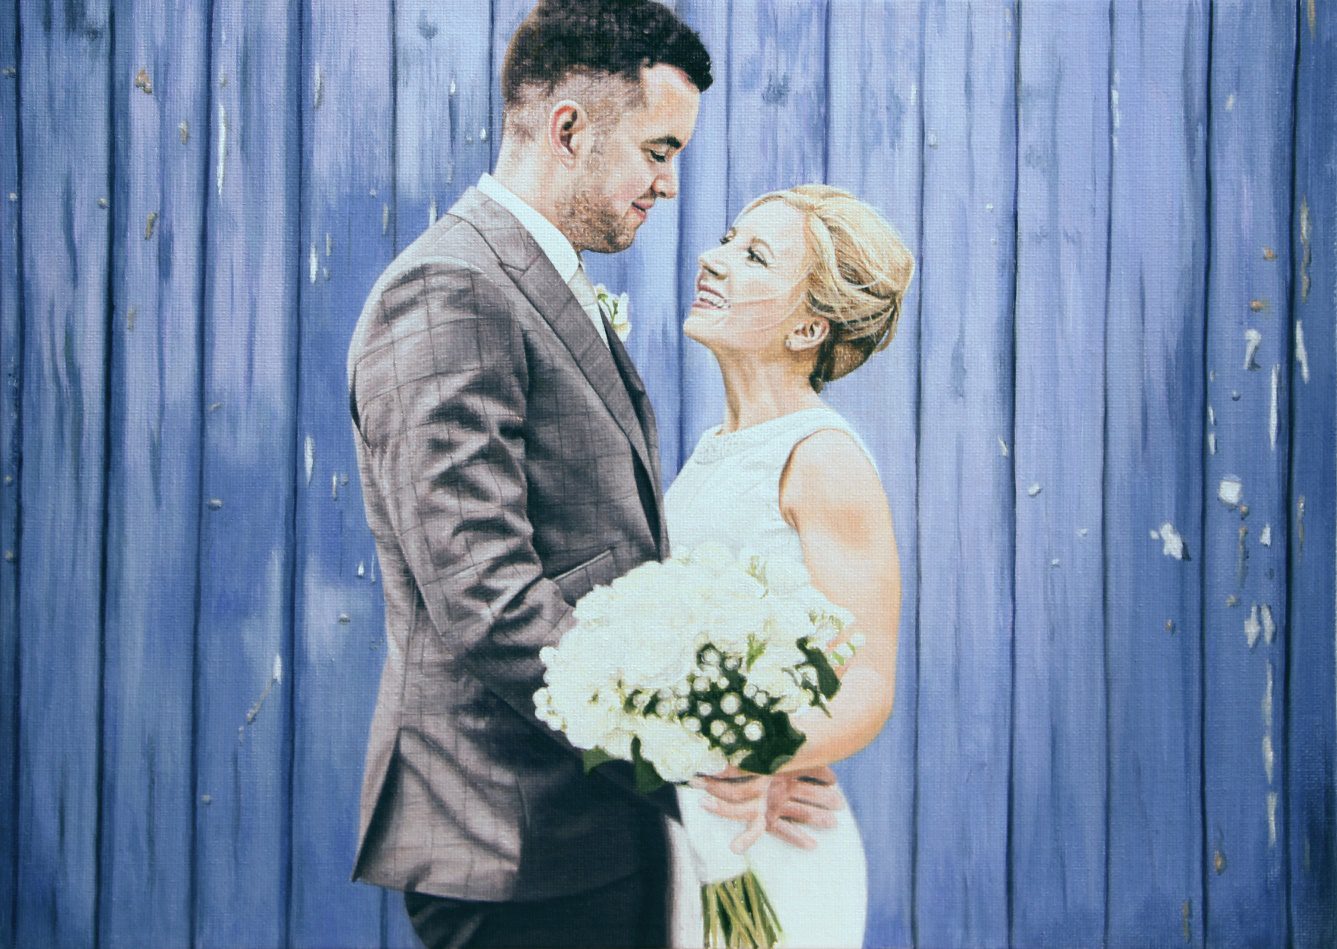 commission an artist to turn your wedding photography into a beautiful oil painting